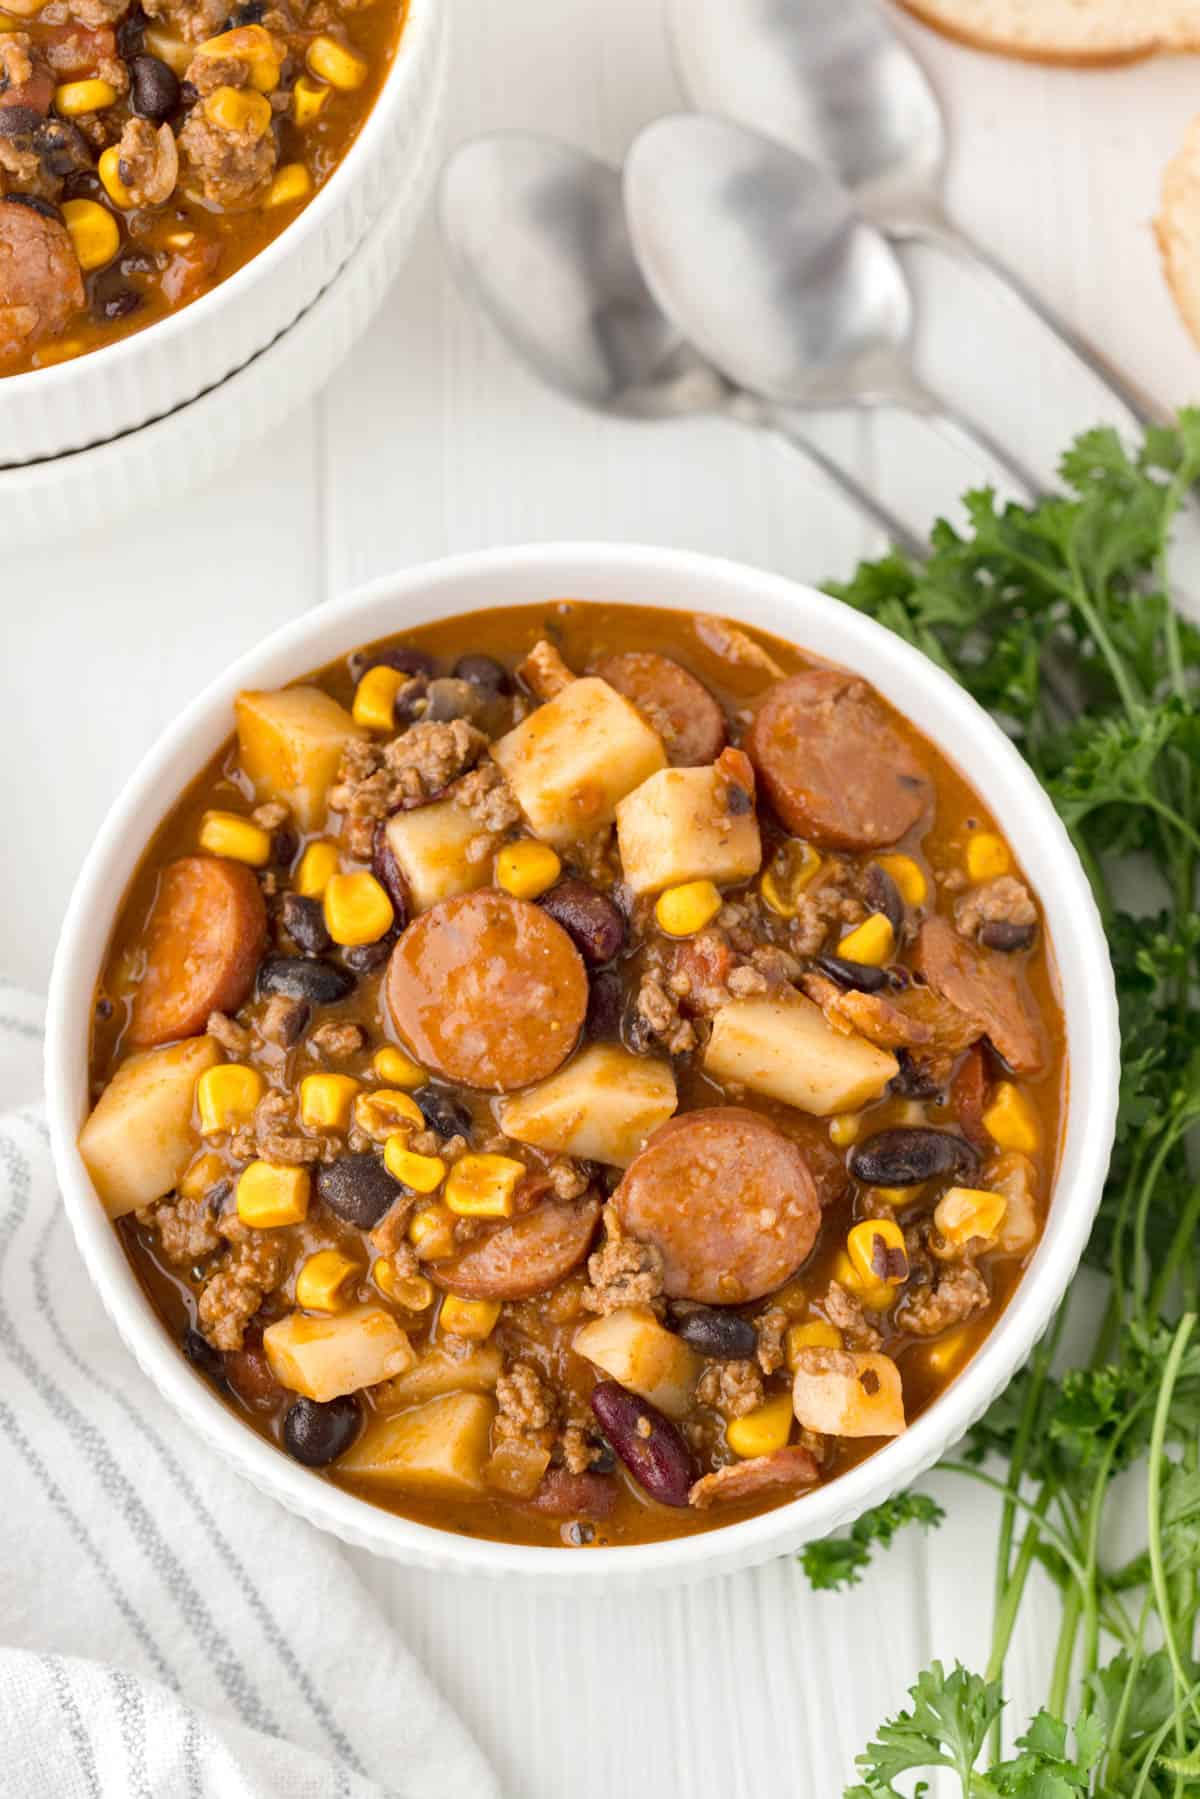 Bowls of cowboy stew with potatoes, ground beef, and smoked sausage.